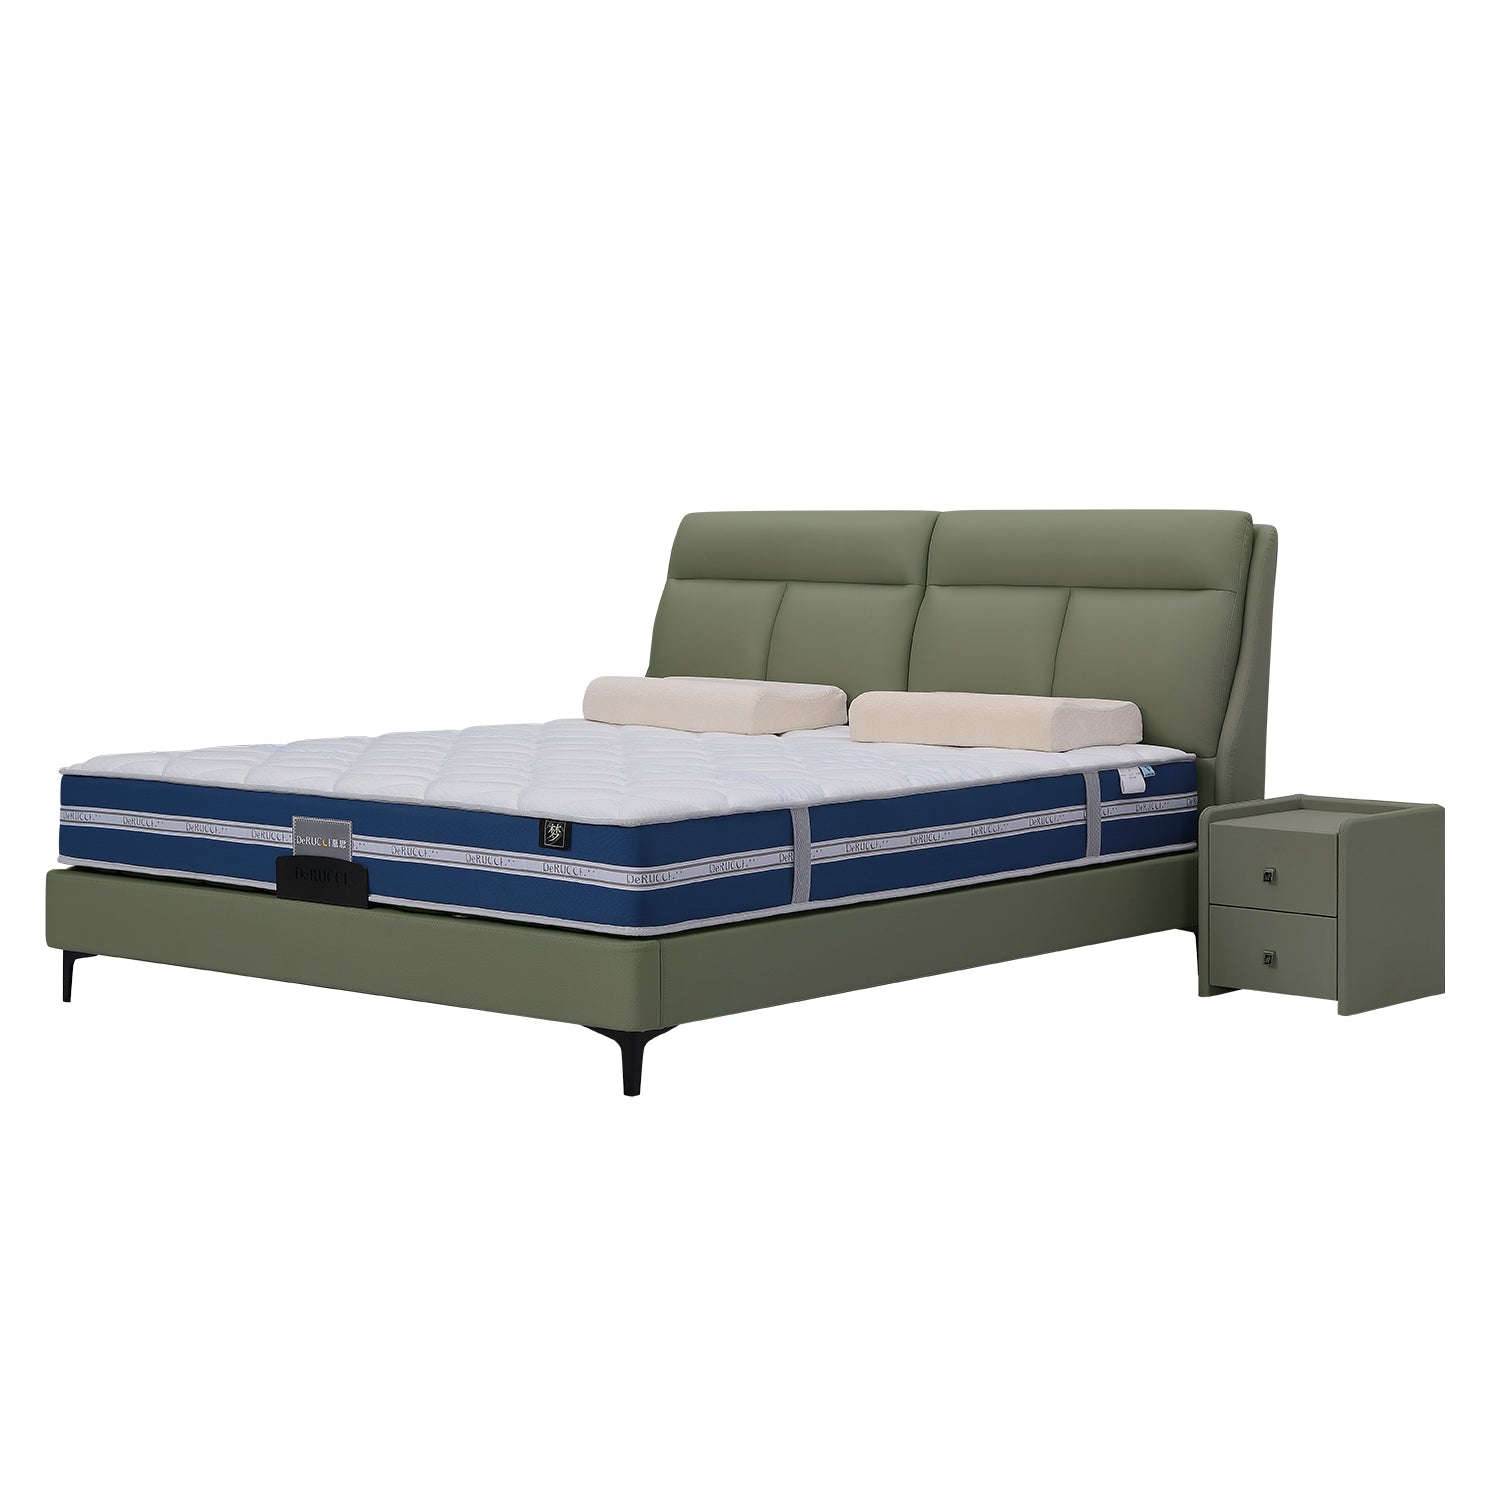 Green leather bed frame DeRUCCI BOC1 - 002 with padded headboard, blue and white mattress, beige pillows, and green nightstand.